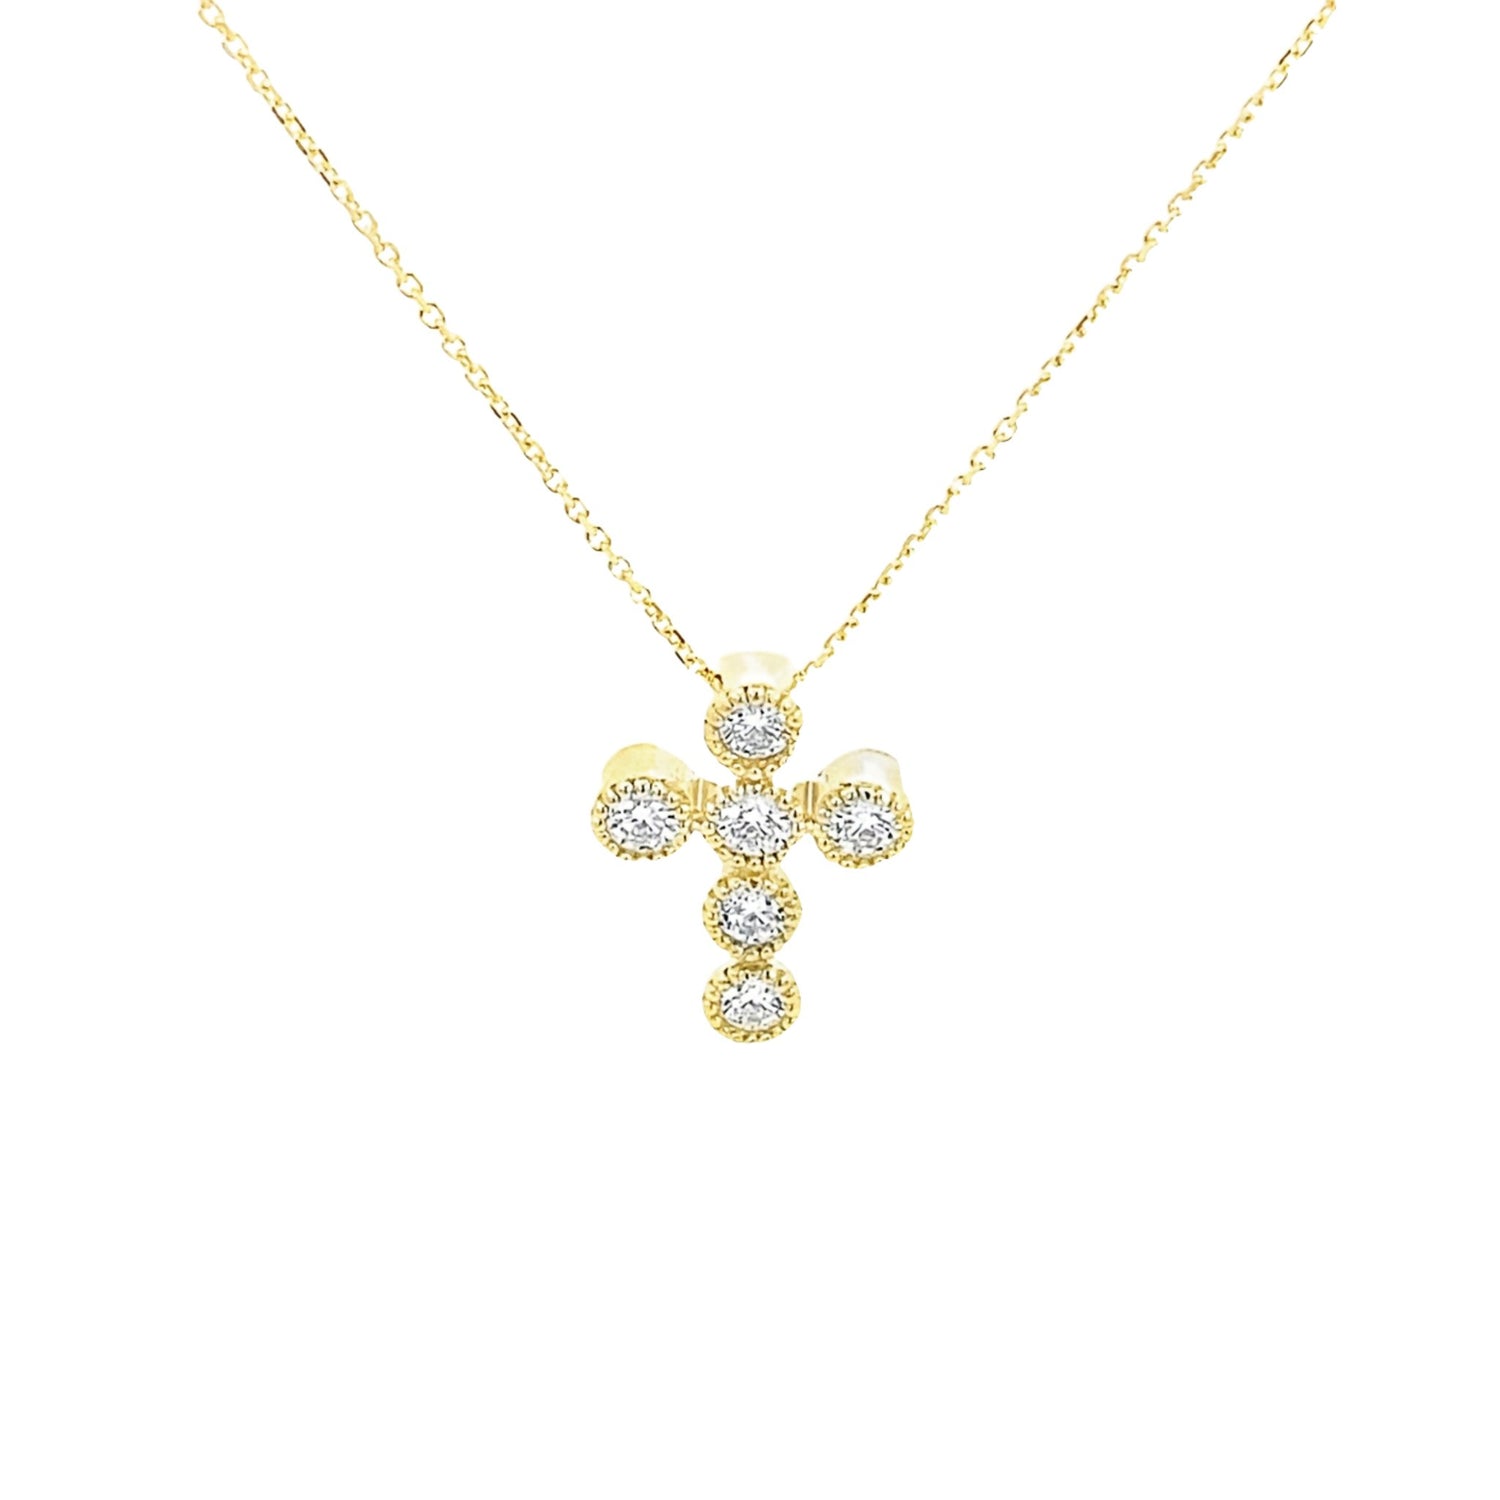 Necklace diamond cross coin edge bezels 14kt yellow gold - Gaines Jewelers